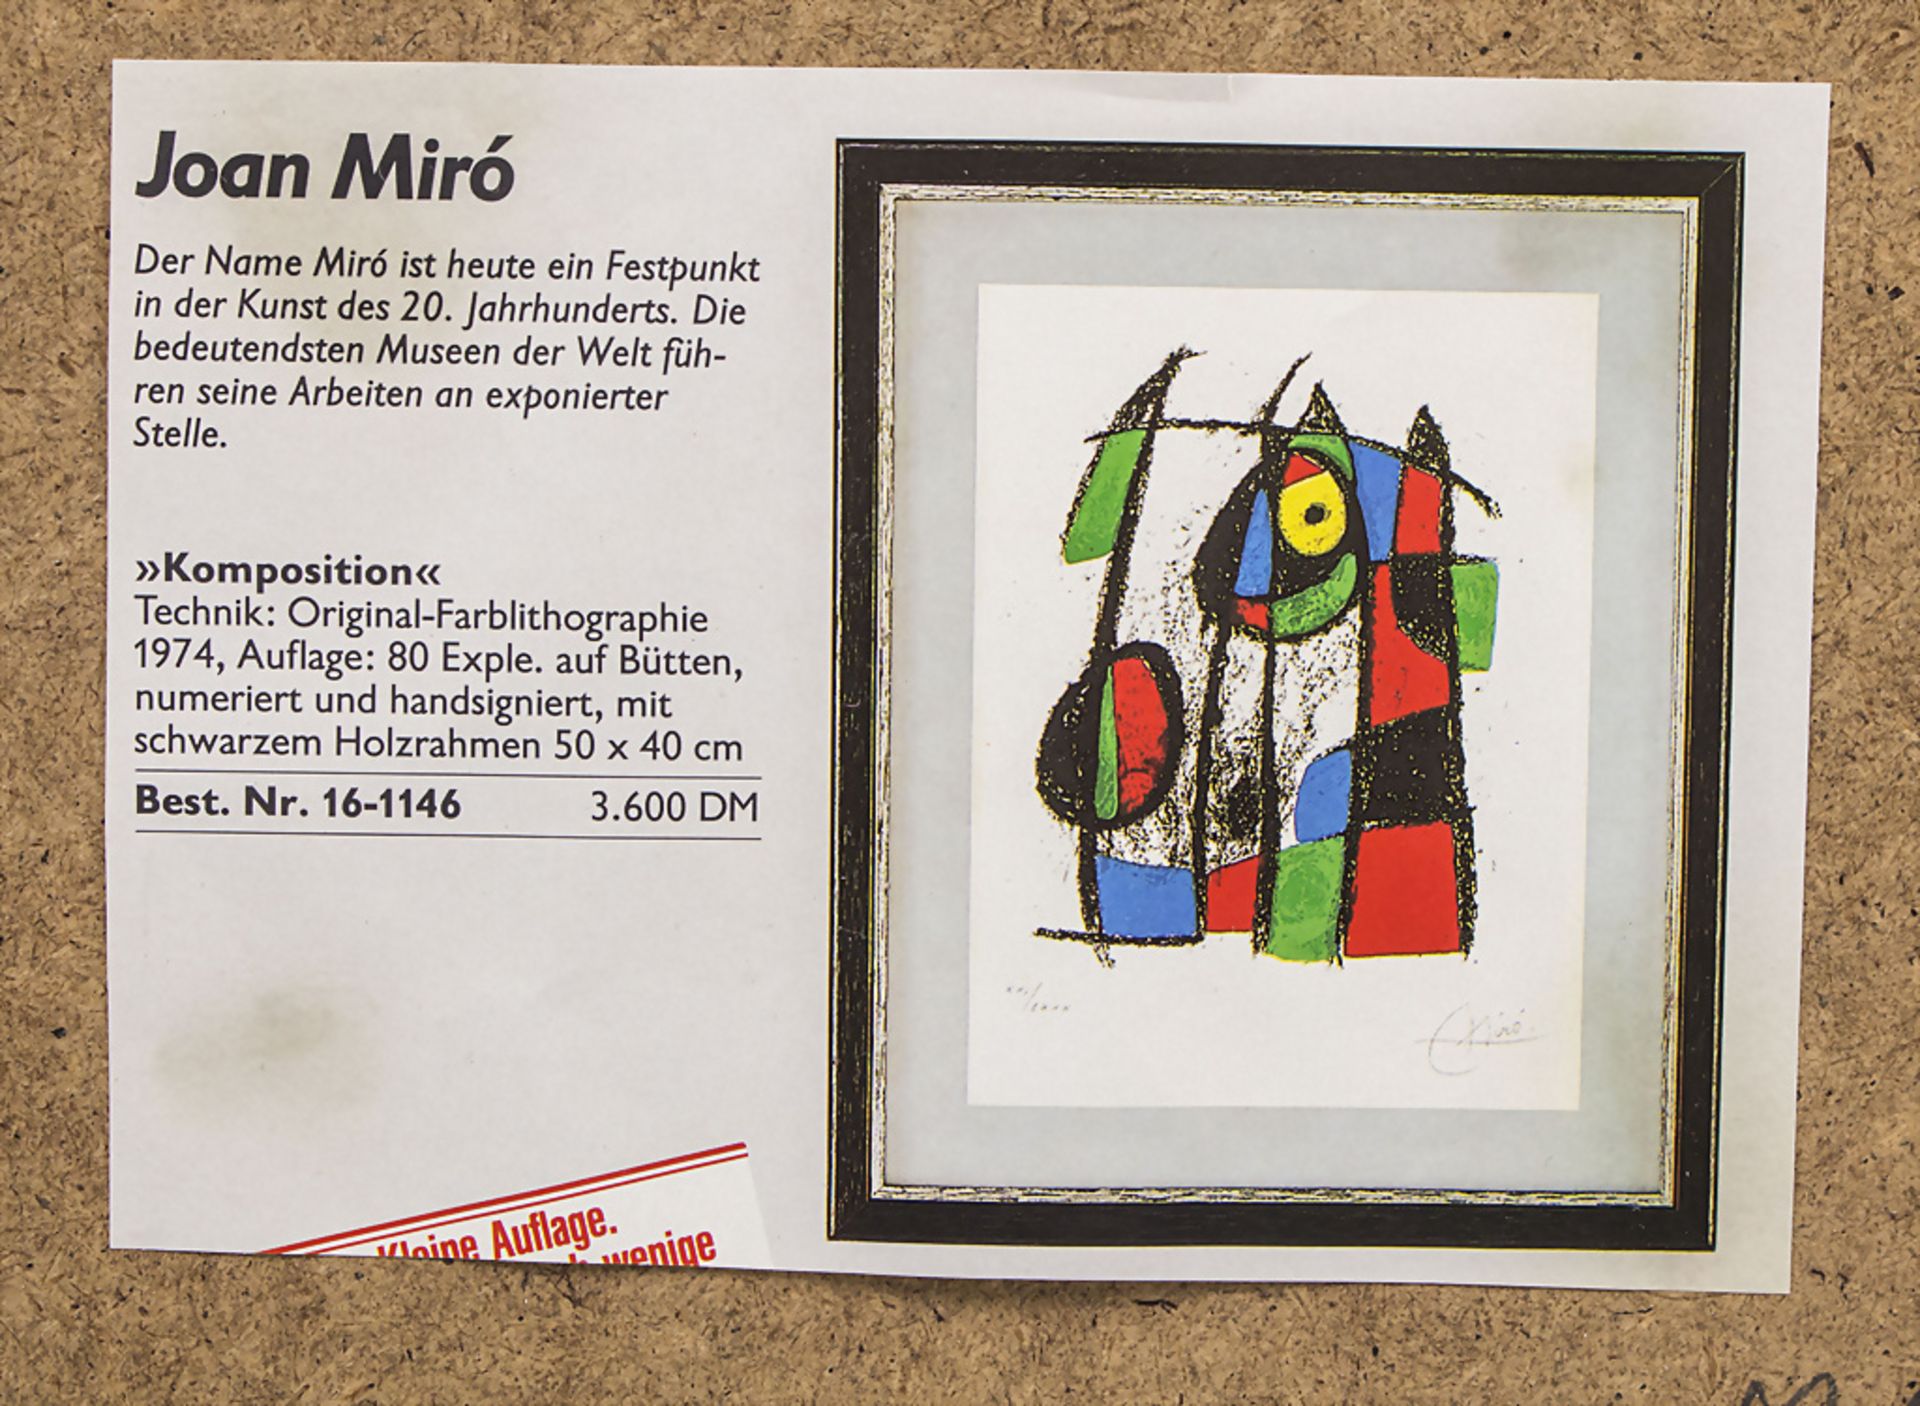 Joan MIRO (1893-1983), 'Komposition' or 'The curious cat', 1975 - Image 5 of 5